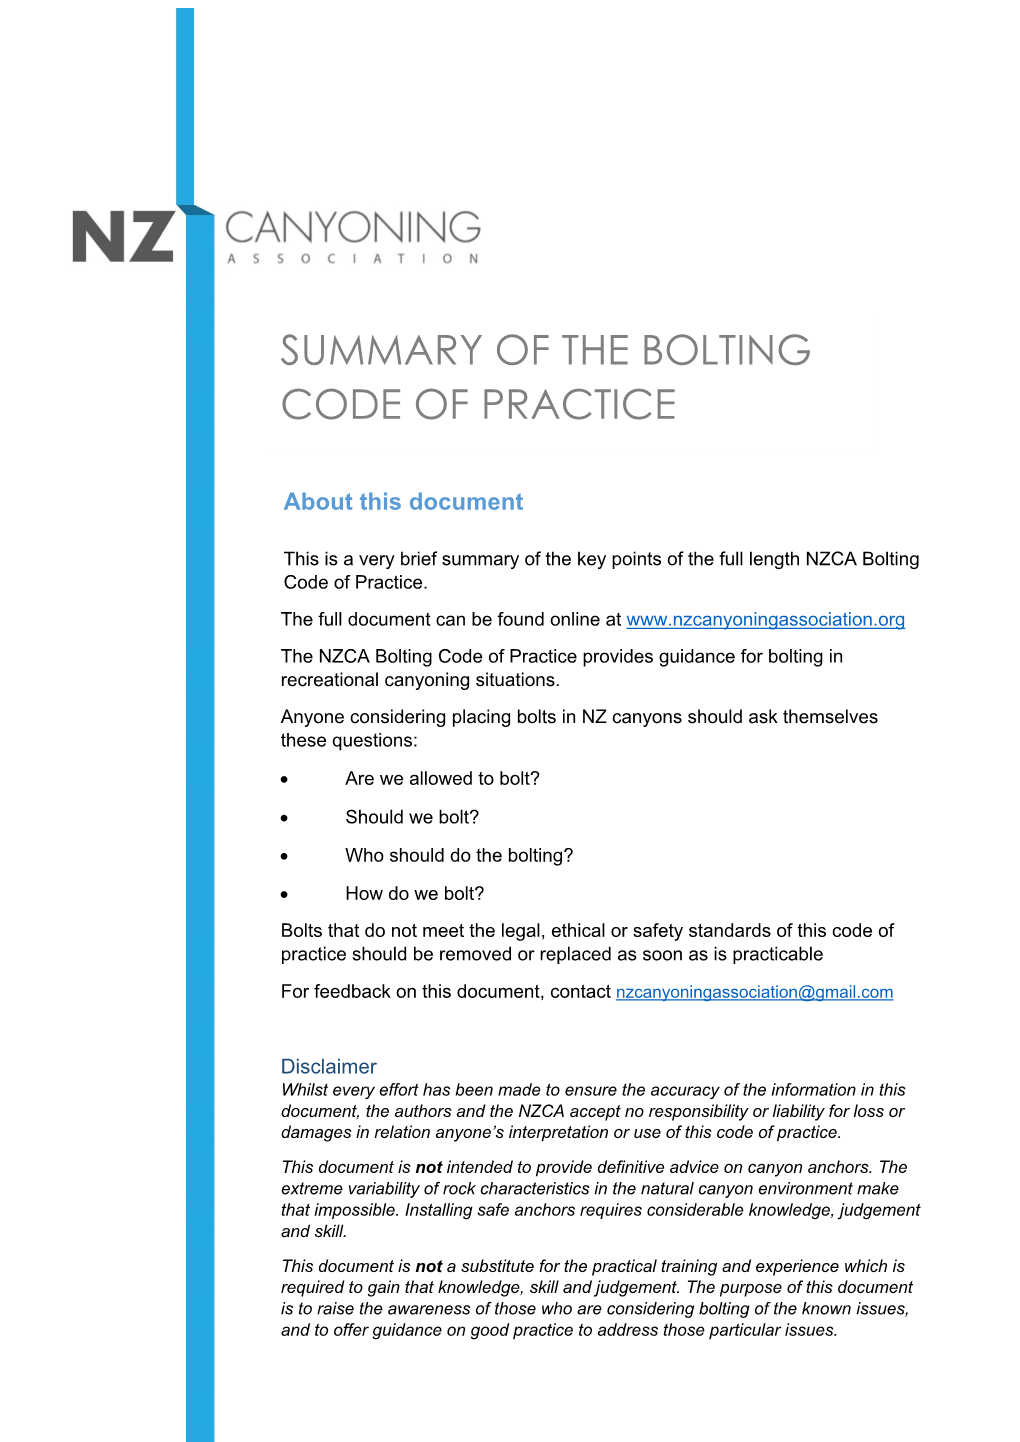 Summary of the Bolting Code of Practice